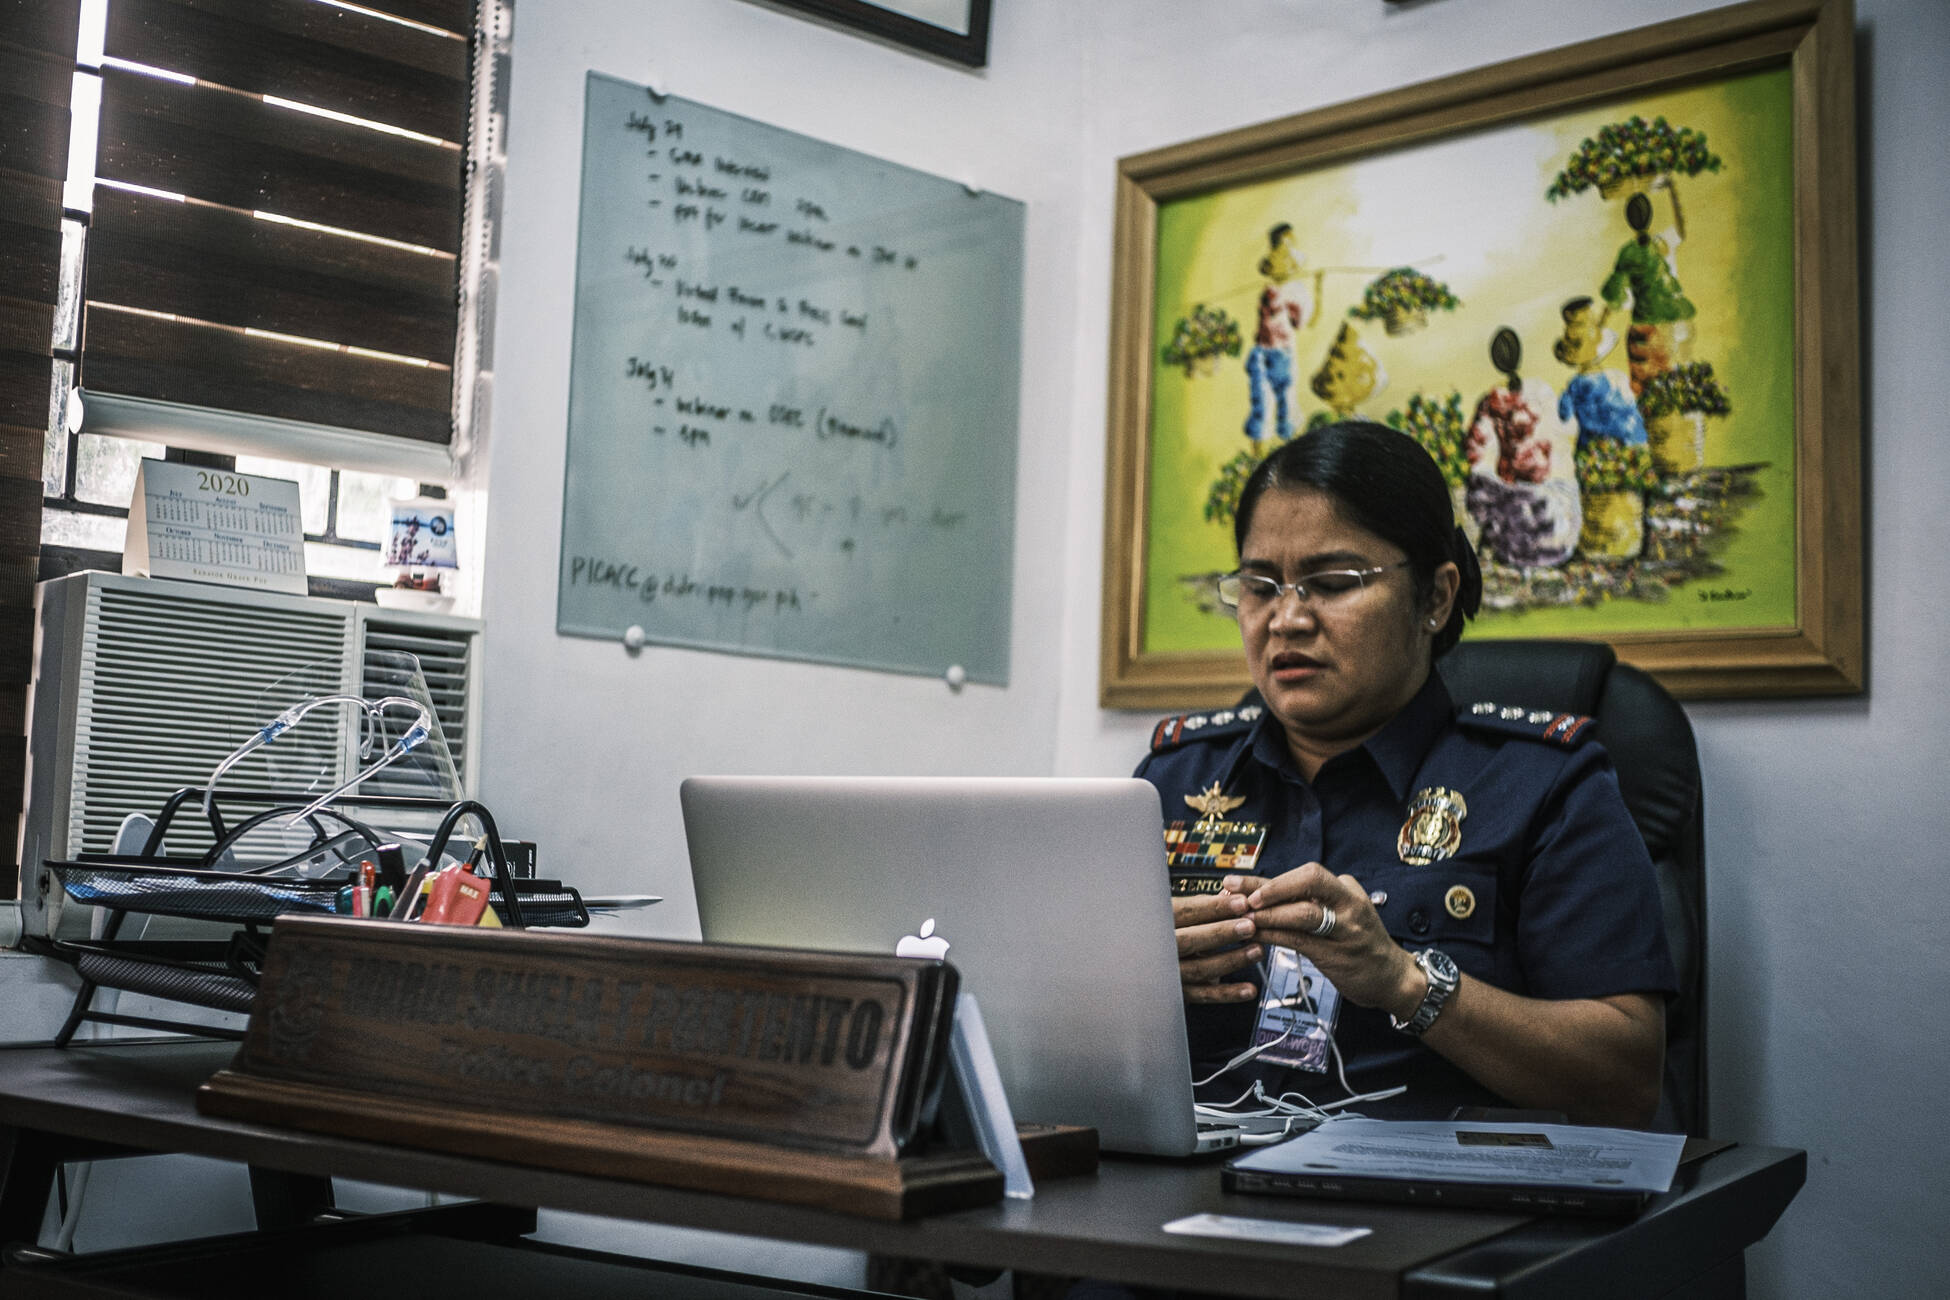 Colonel Sheila Portento is responsible for investigating child exploitation cases in the National Capital Region. Photo: Luis Liwanag